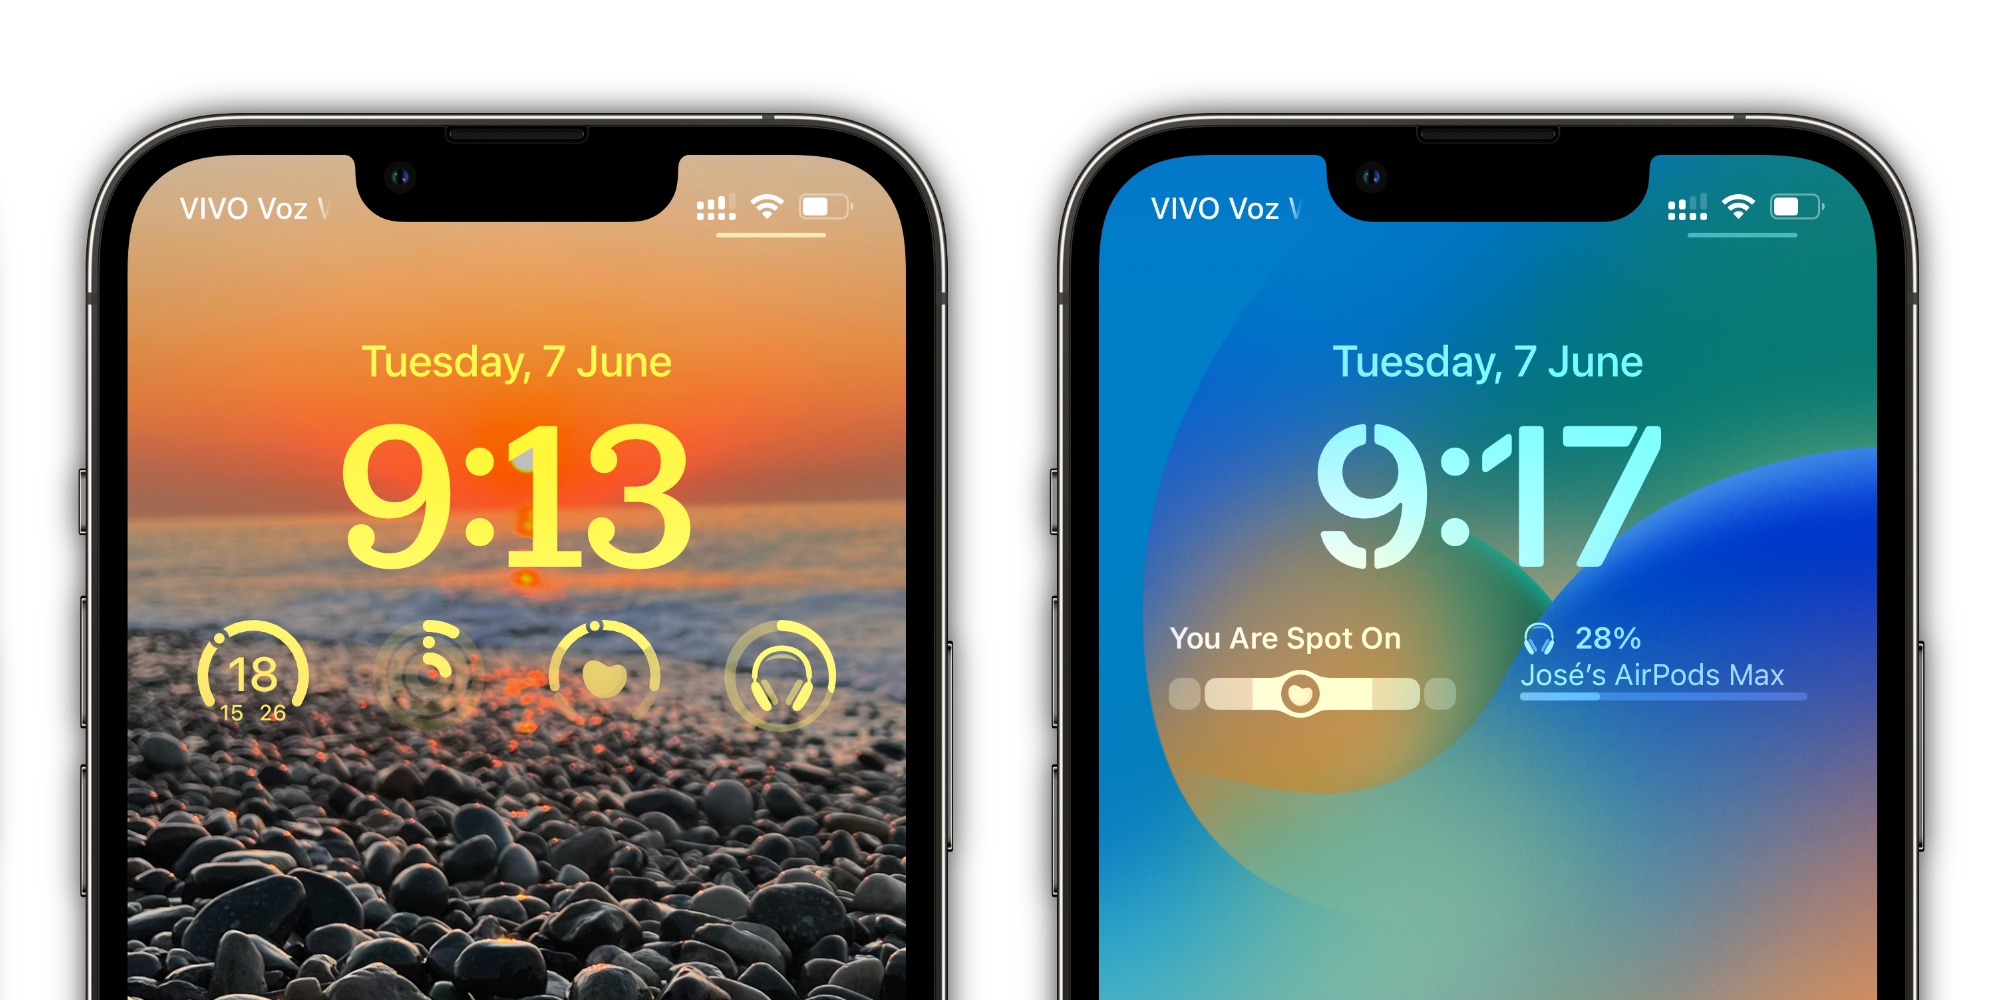 iOS 16 brings a new iPhone lock screen, but there are still some things you can't change